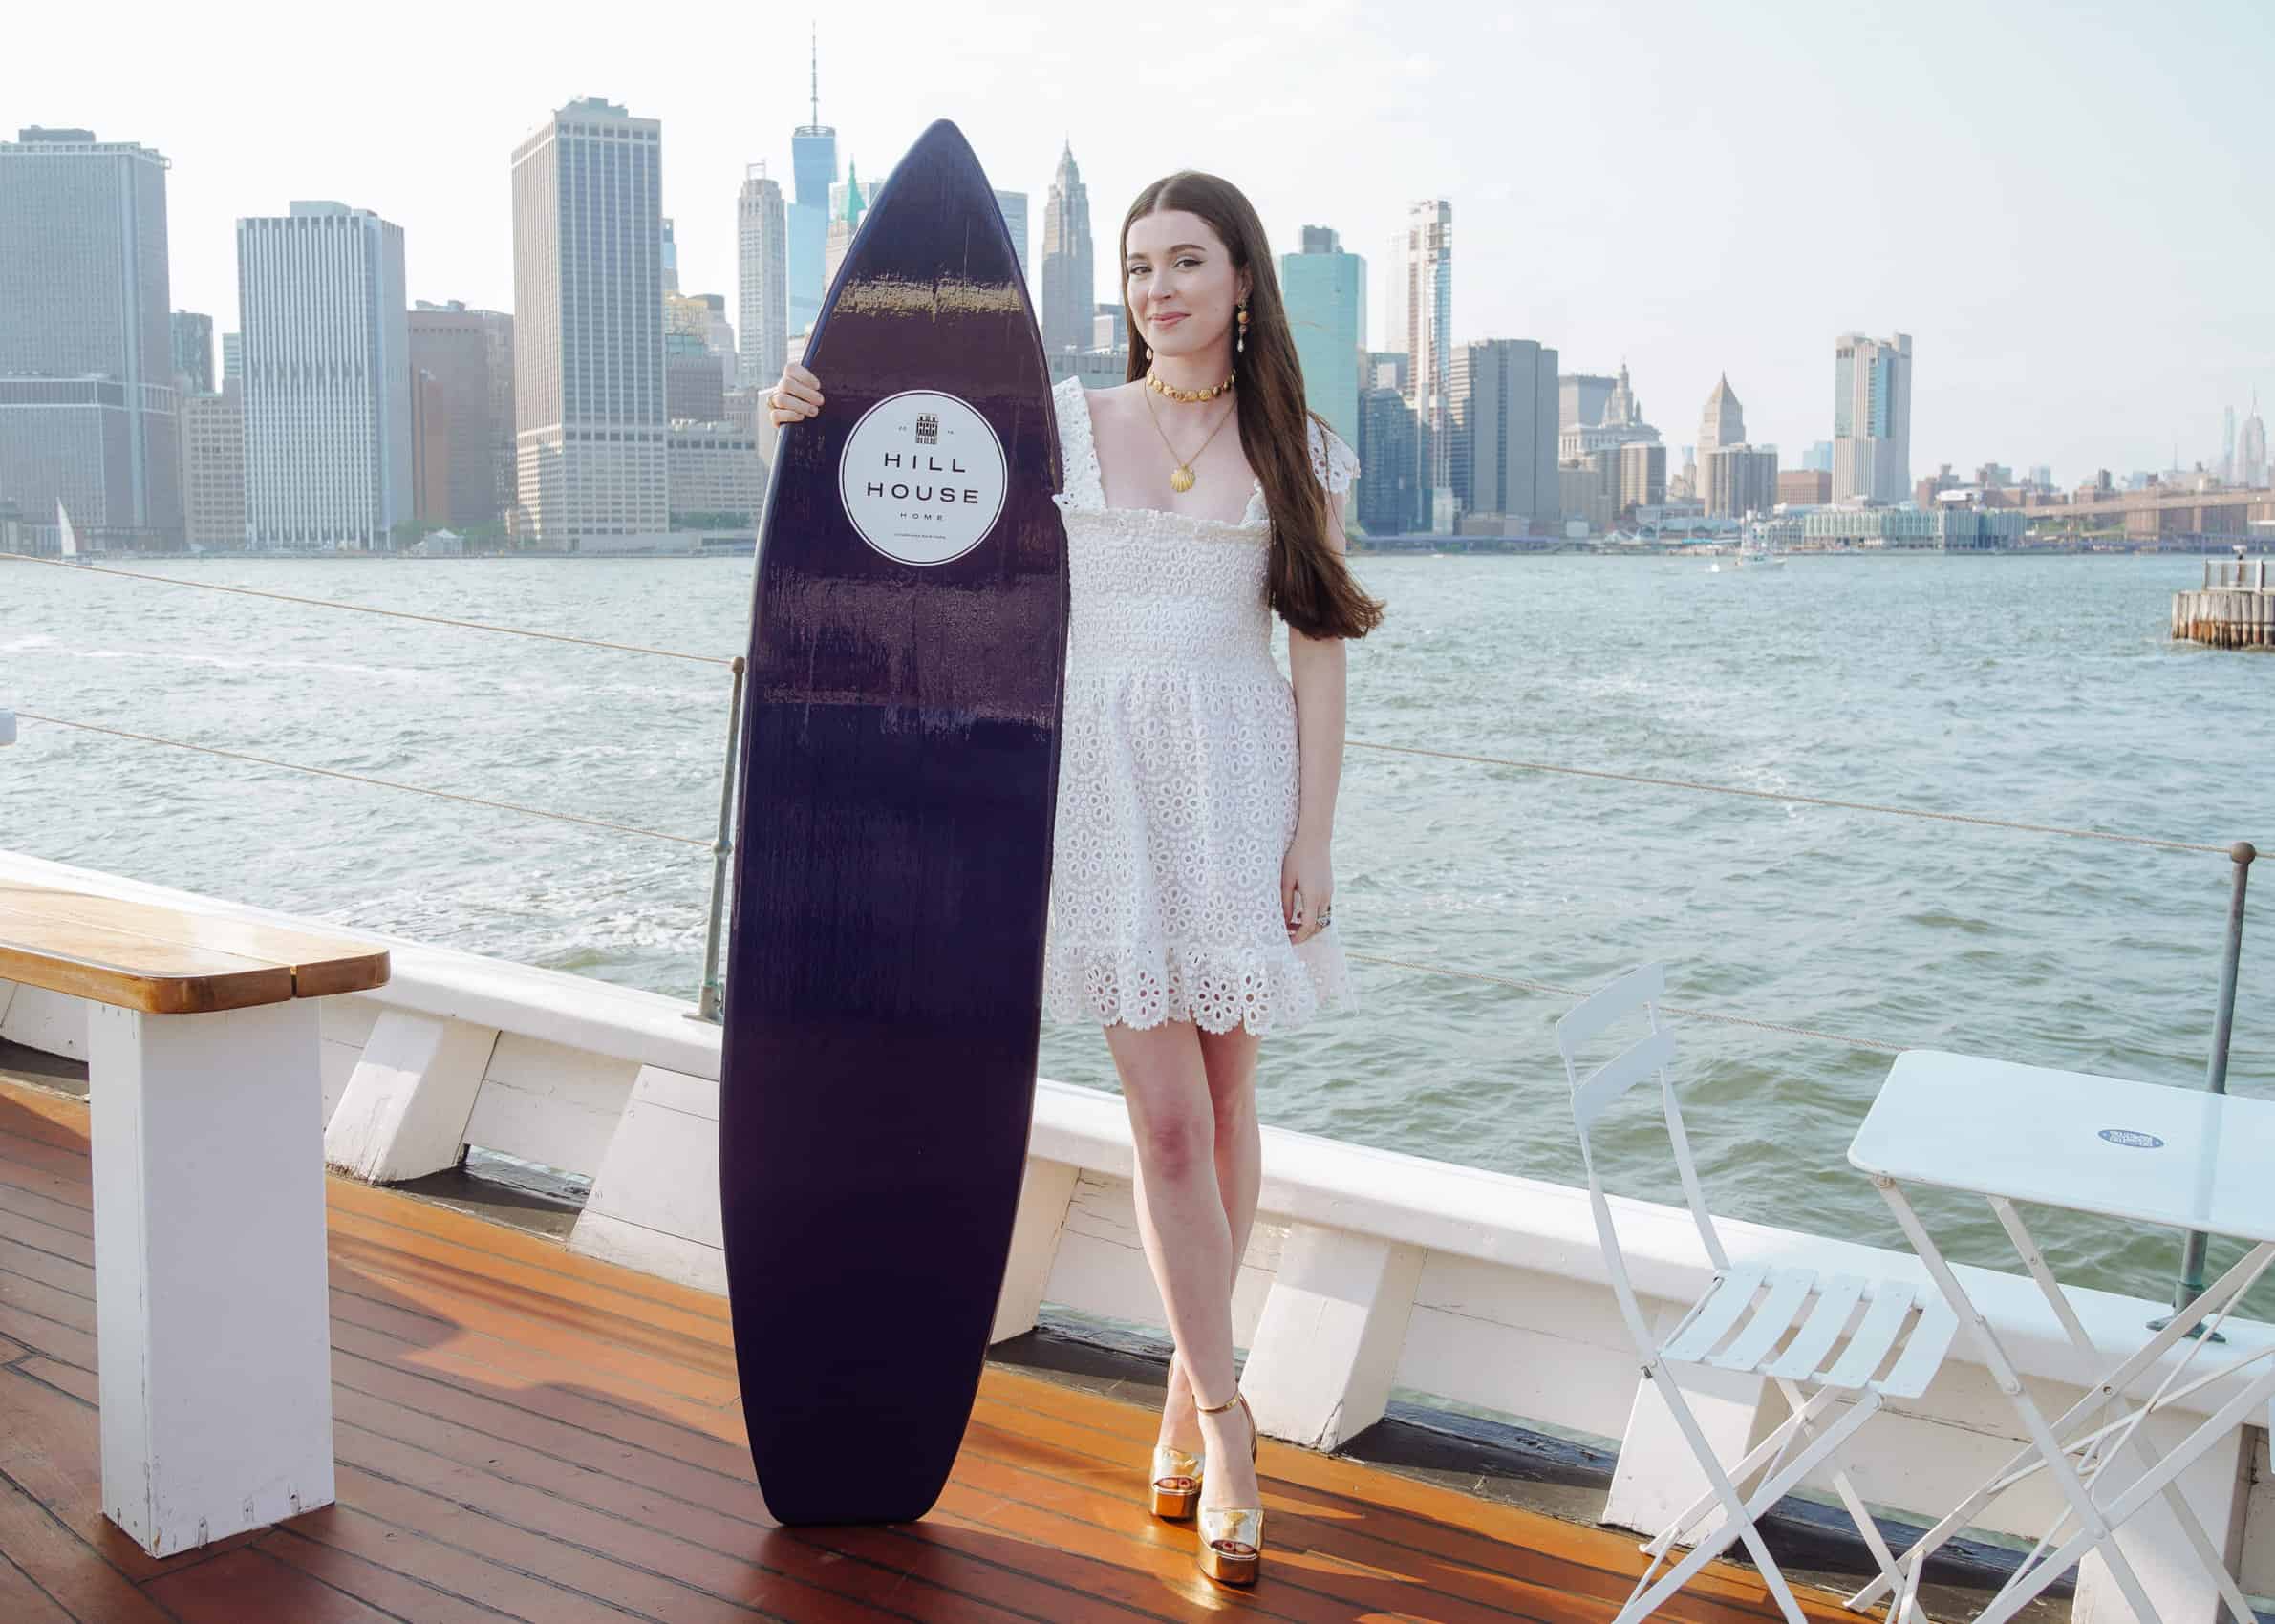 Hill House Home & Net-a-Porter Set Sail, Wes Gordon To Design Costumes For NYC Ballet